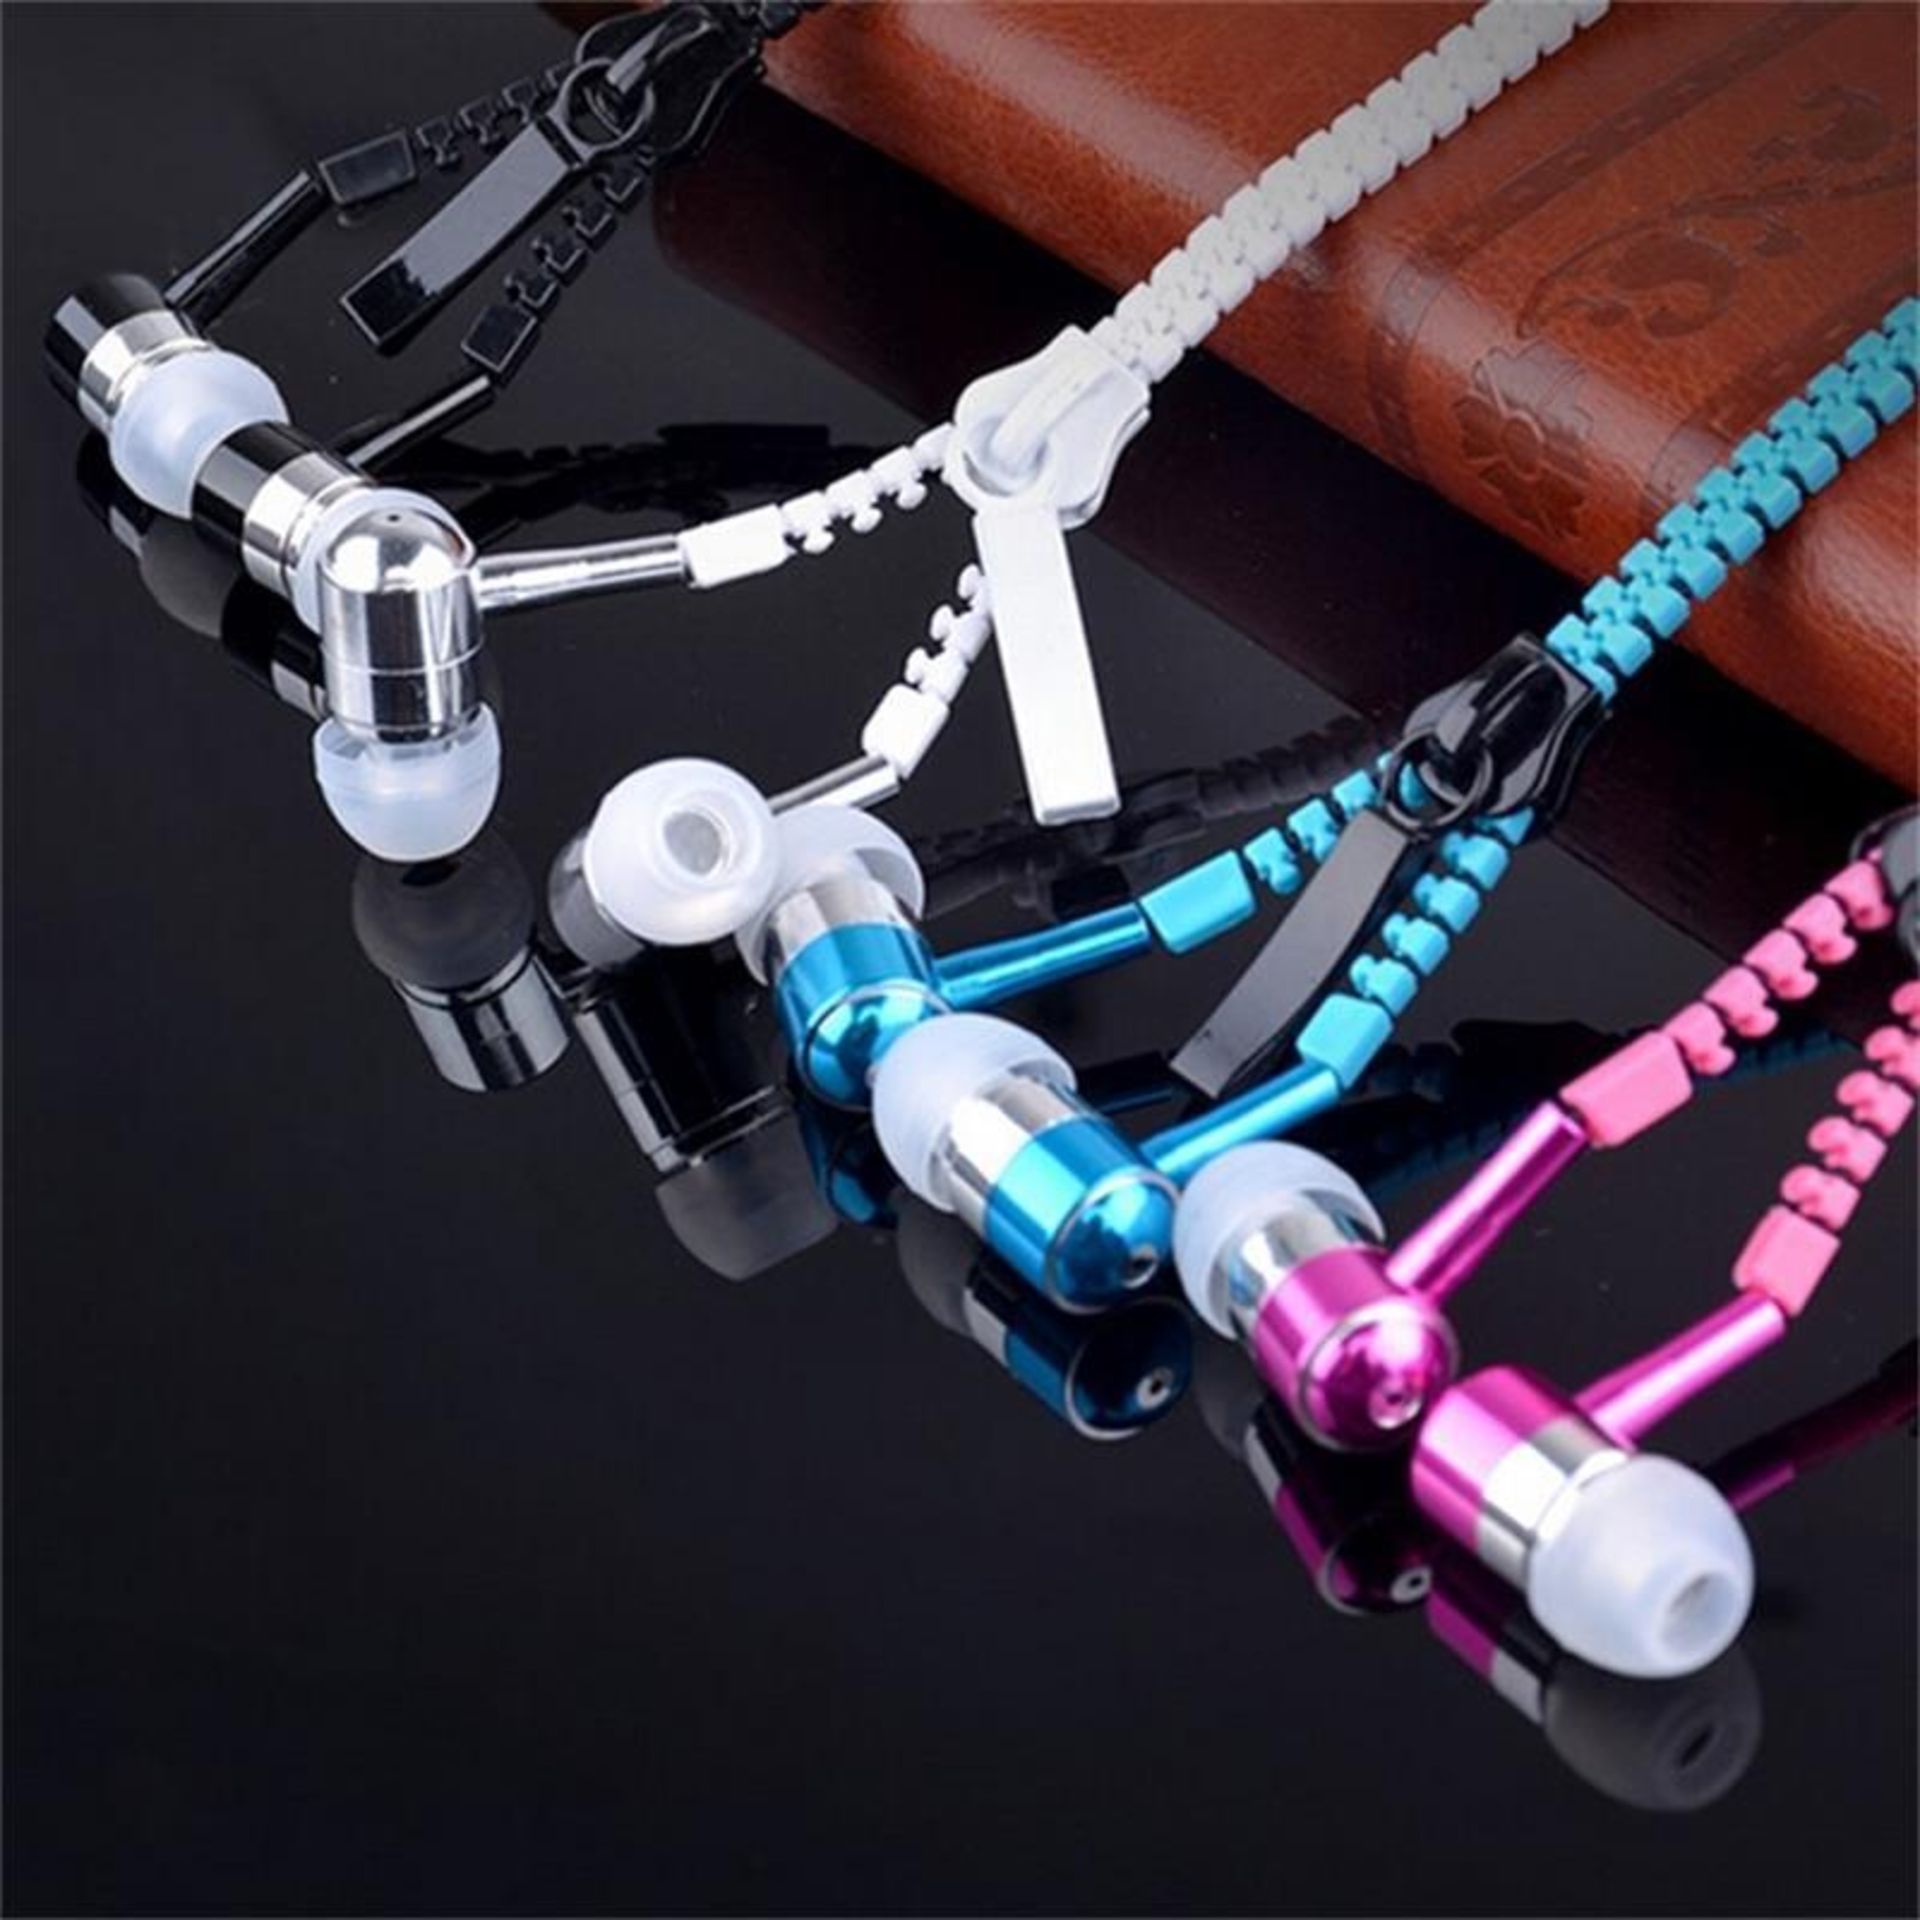 *TRADE QTY* Brand New Zip Up Earphones With Non Tangle Wire - 3.5mm Universal Jack - Microphone For